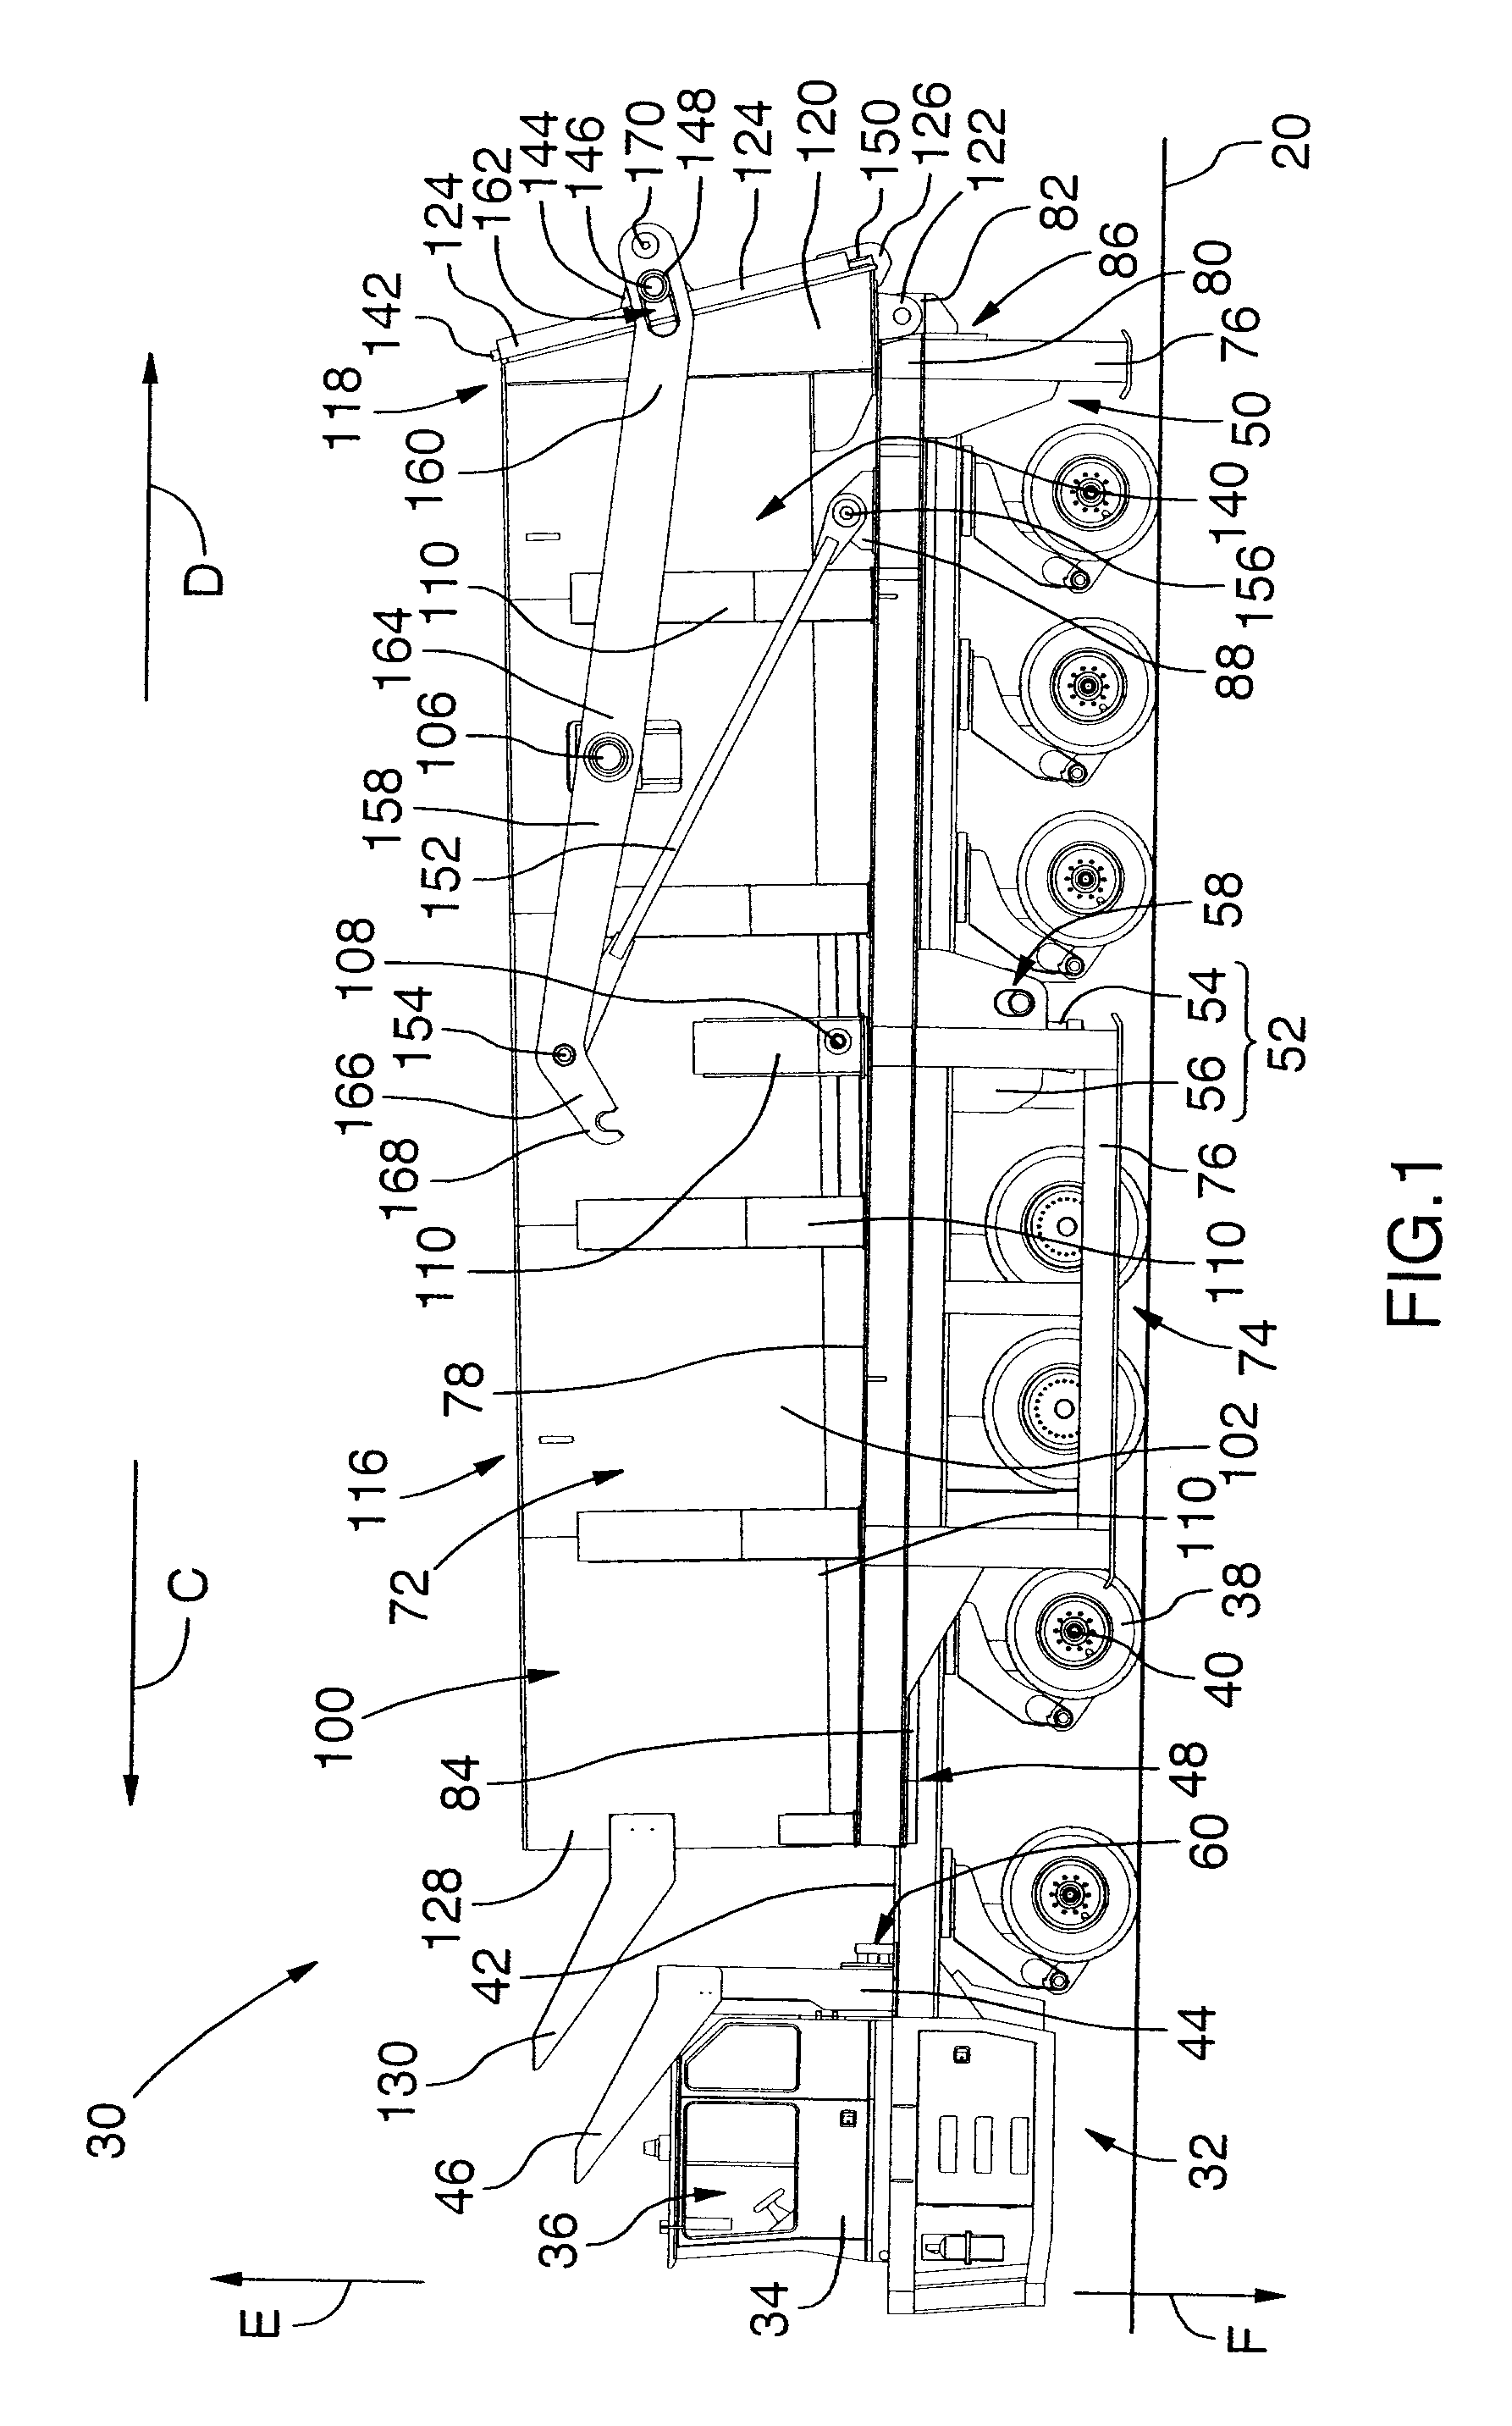 Slag transport and dumping apparatus and method